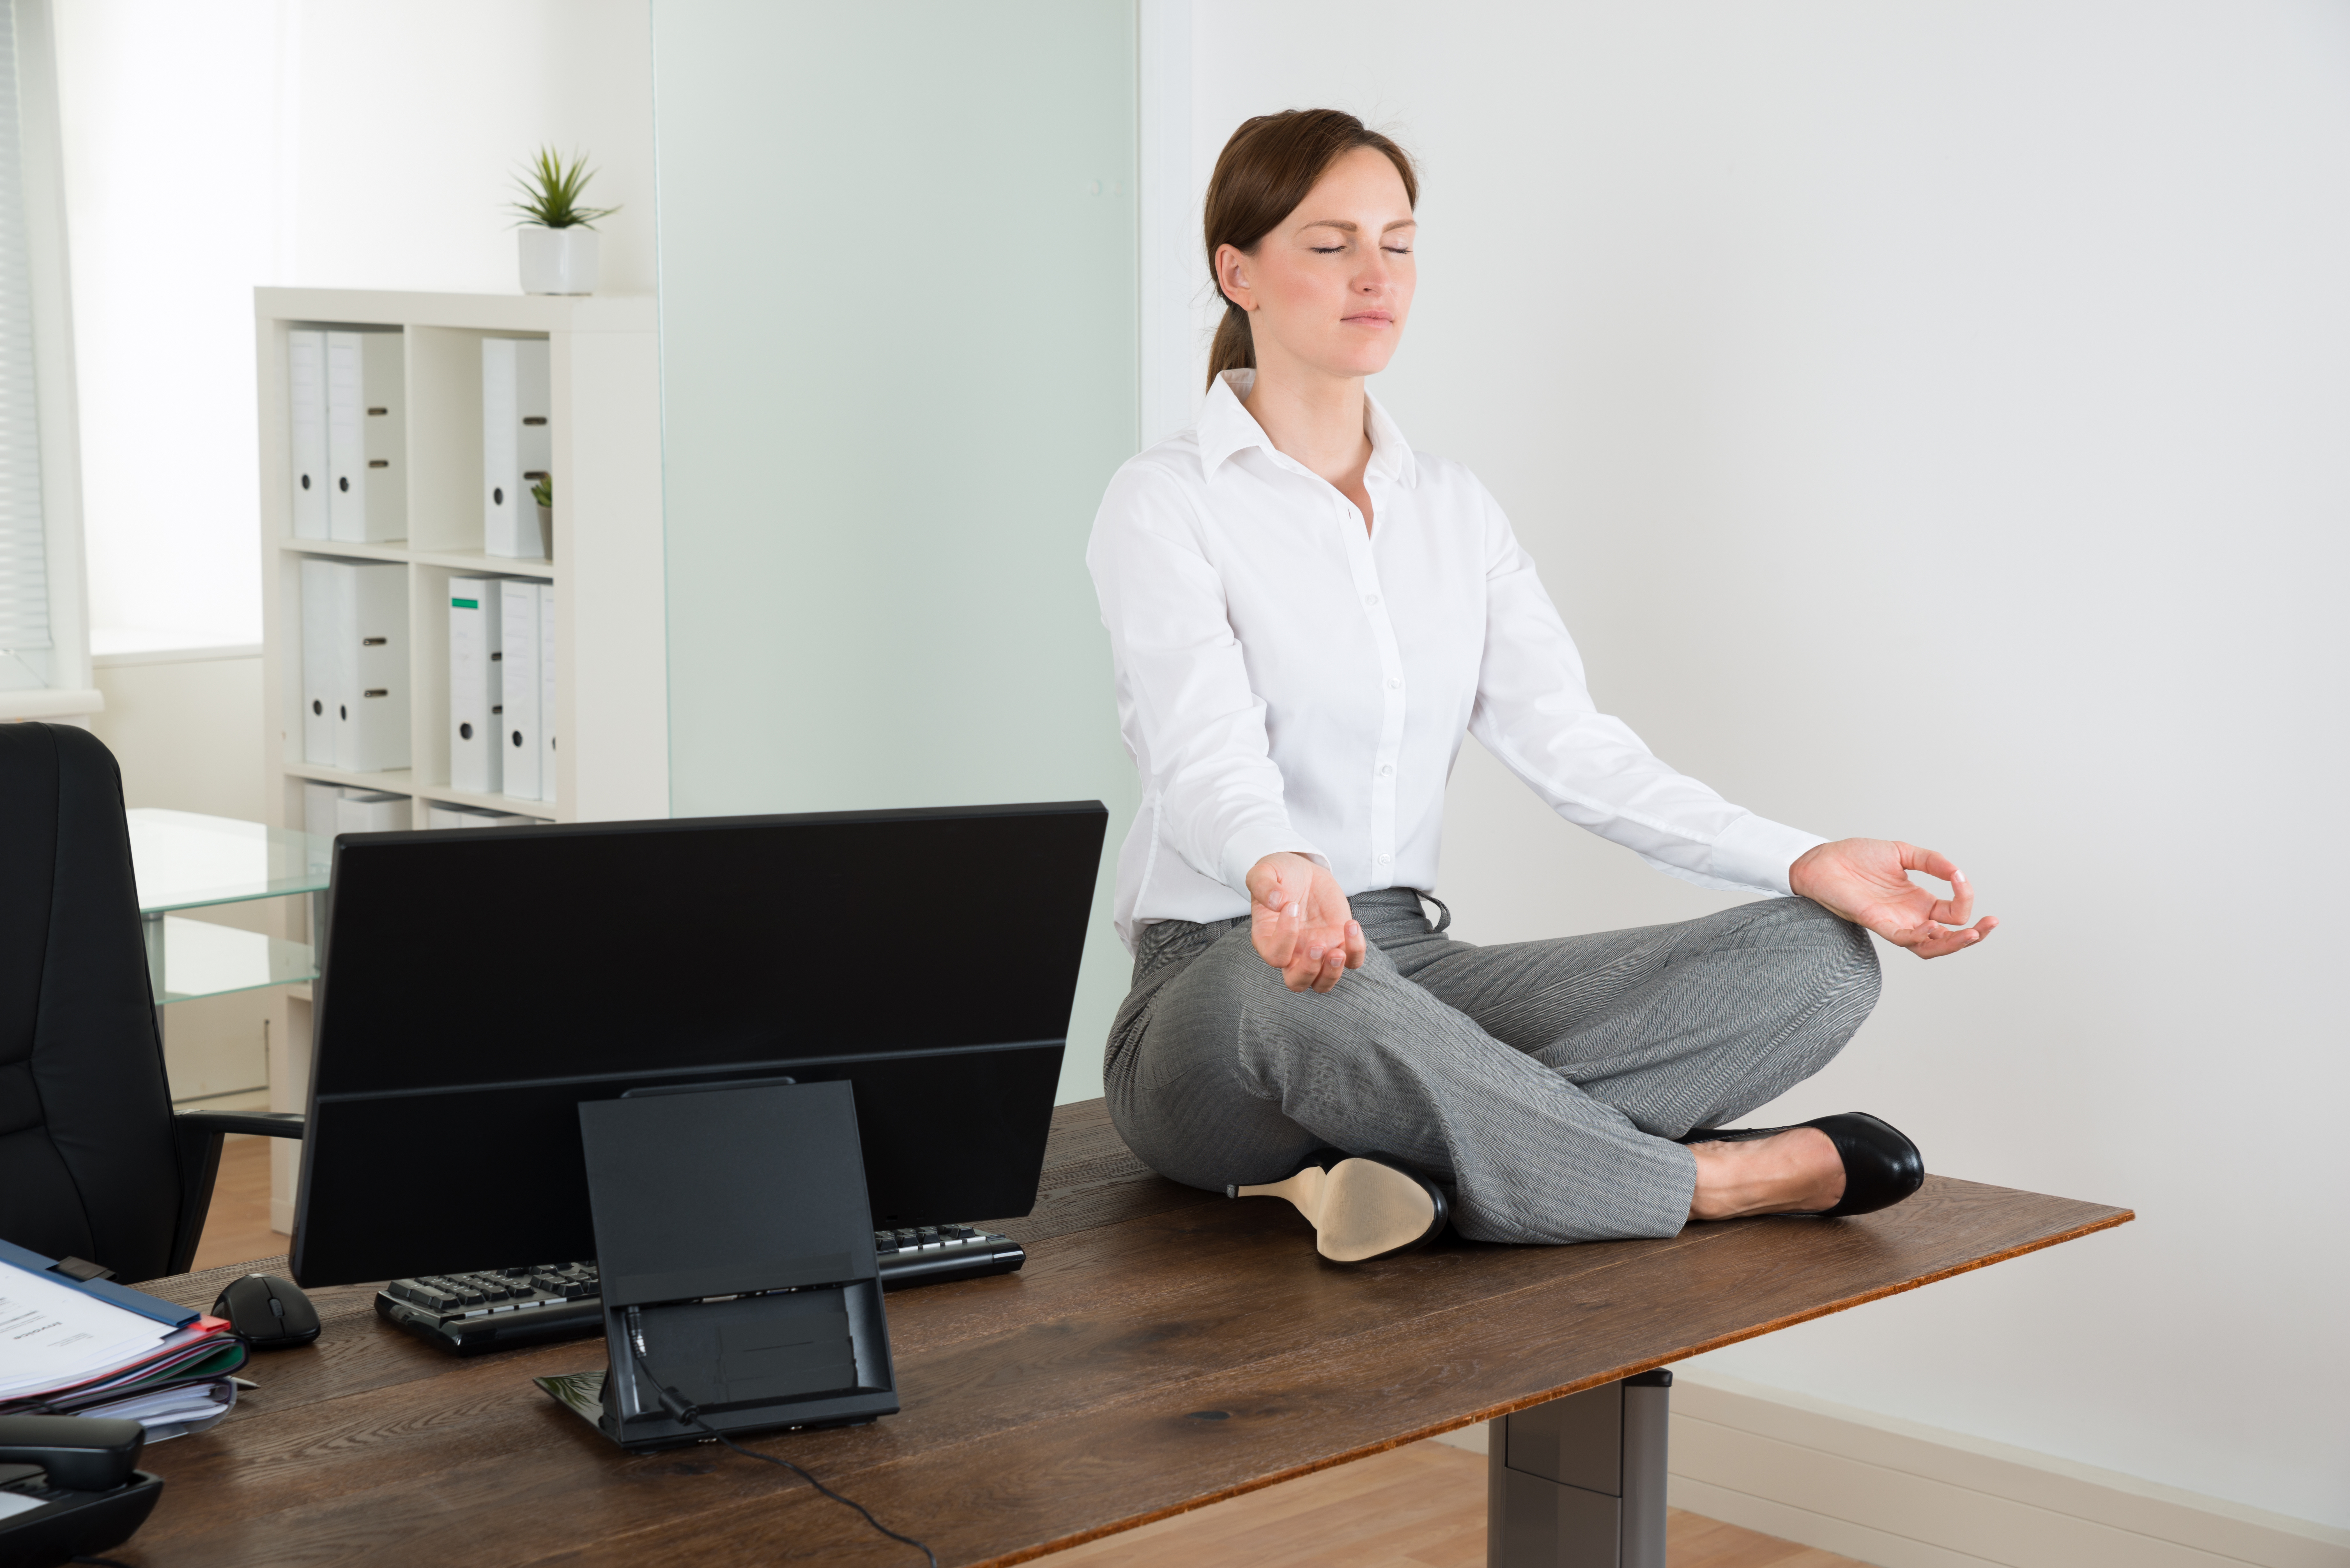 Businesswoman Doing Yoga In Office